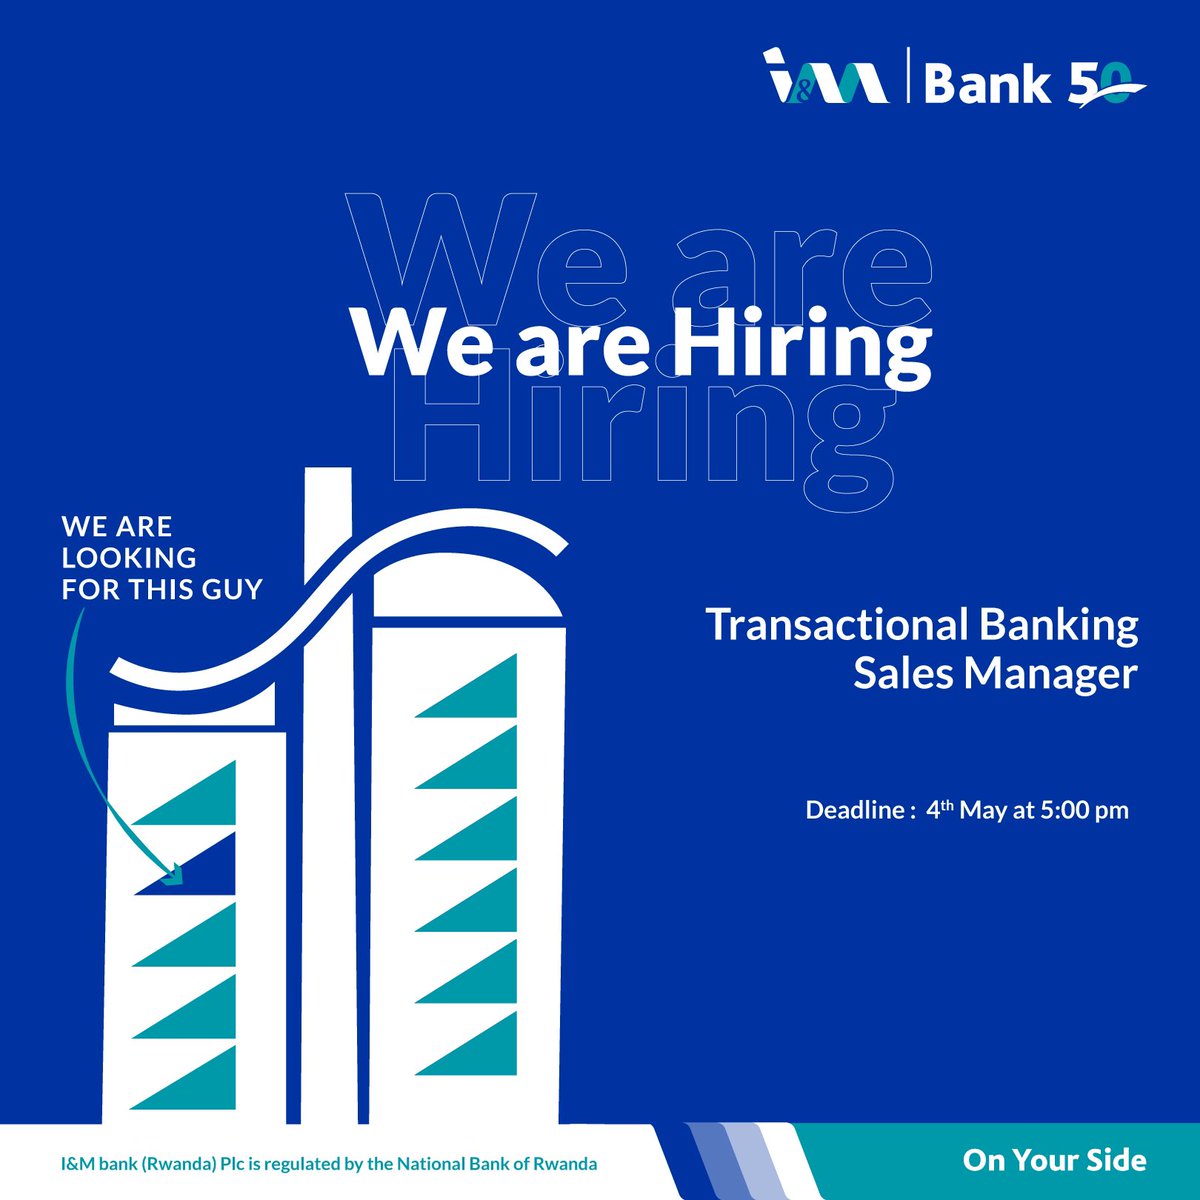 We are a team of young and energetic professionals! Enticing right? If that's the work environment you are looking for, please check for the available openings. Chief Innovation Officer: lnkd.in/d9vvikj7 Transactional Banking Sales Manager: lnkd.in/dGua5DUs